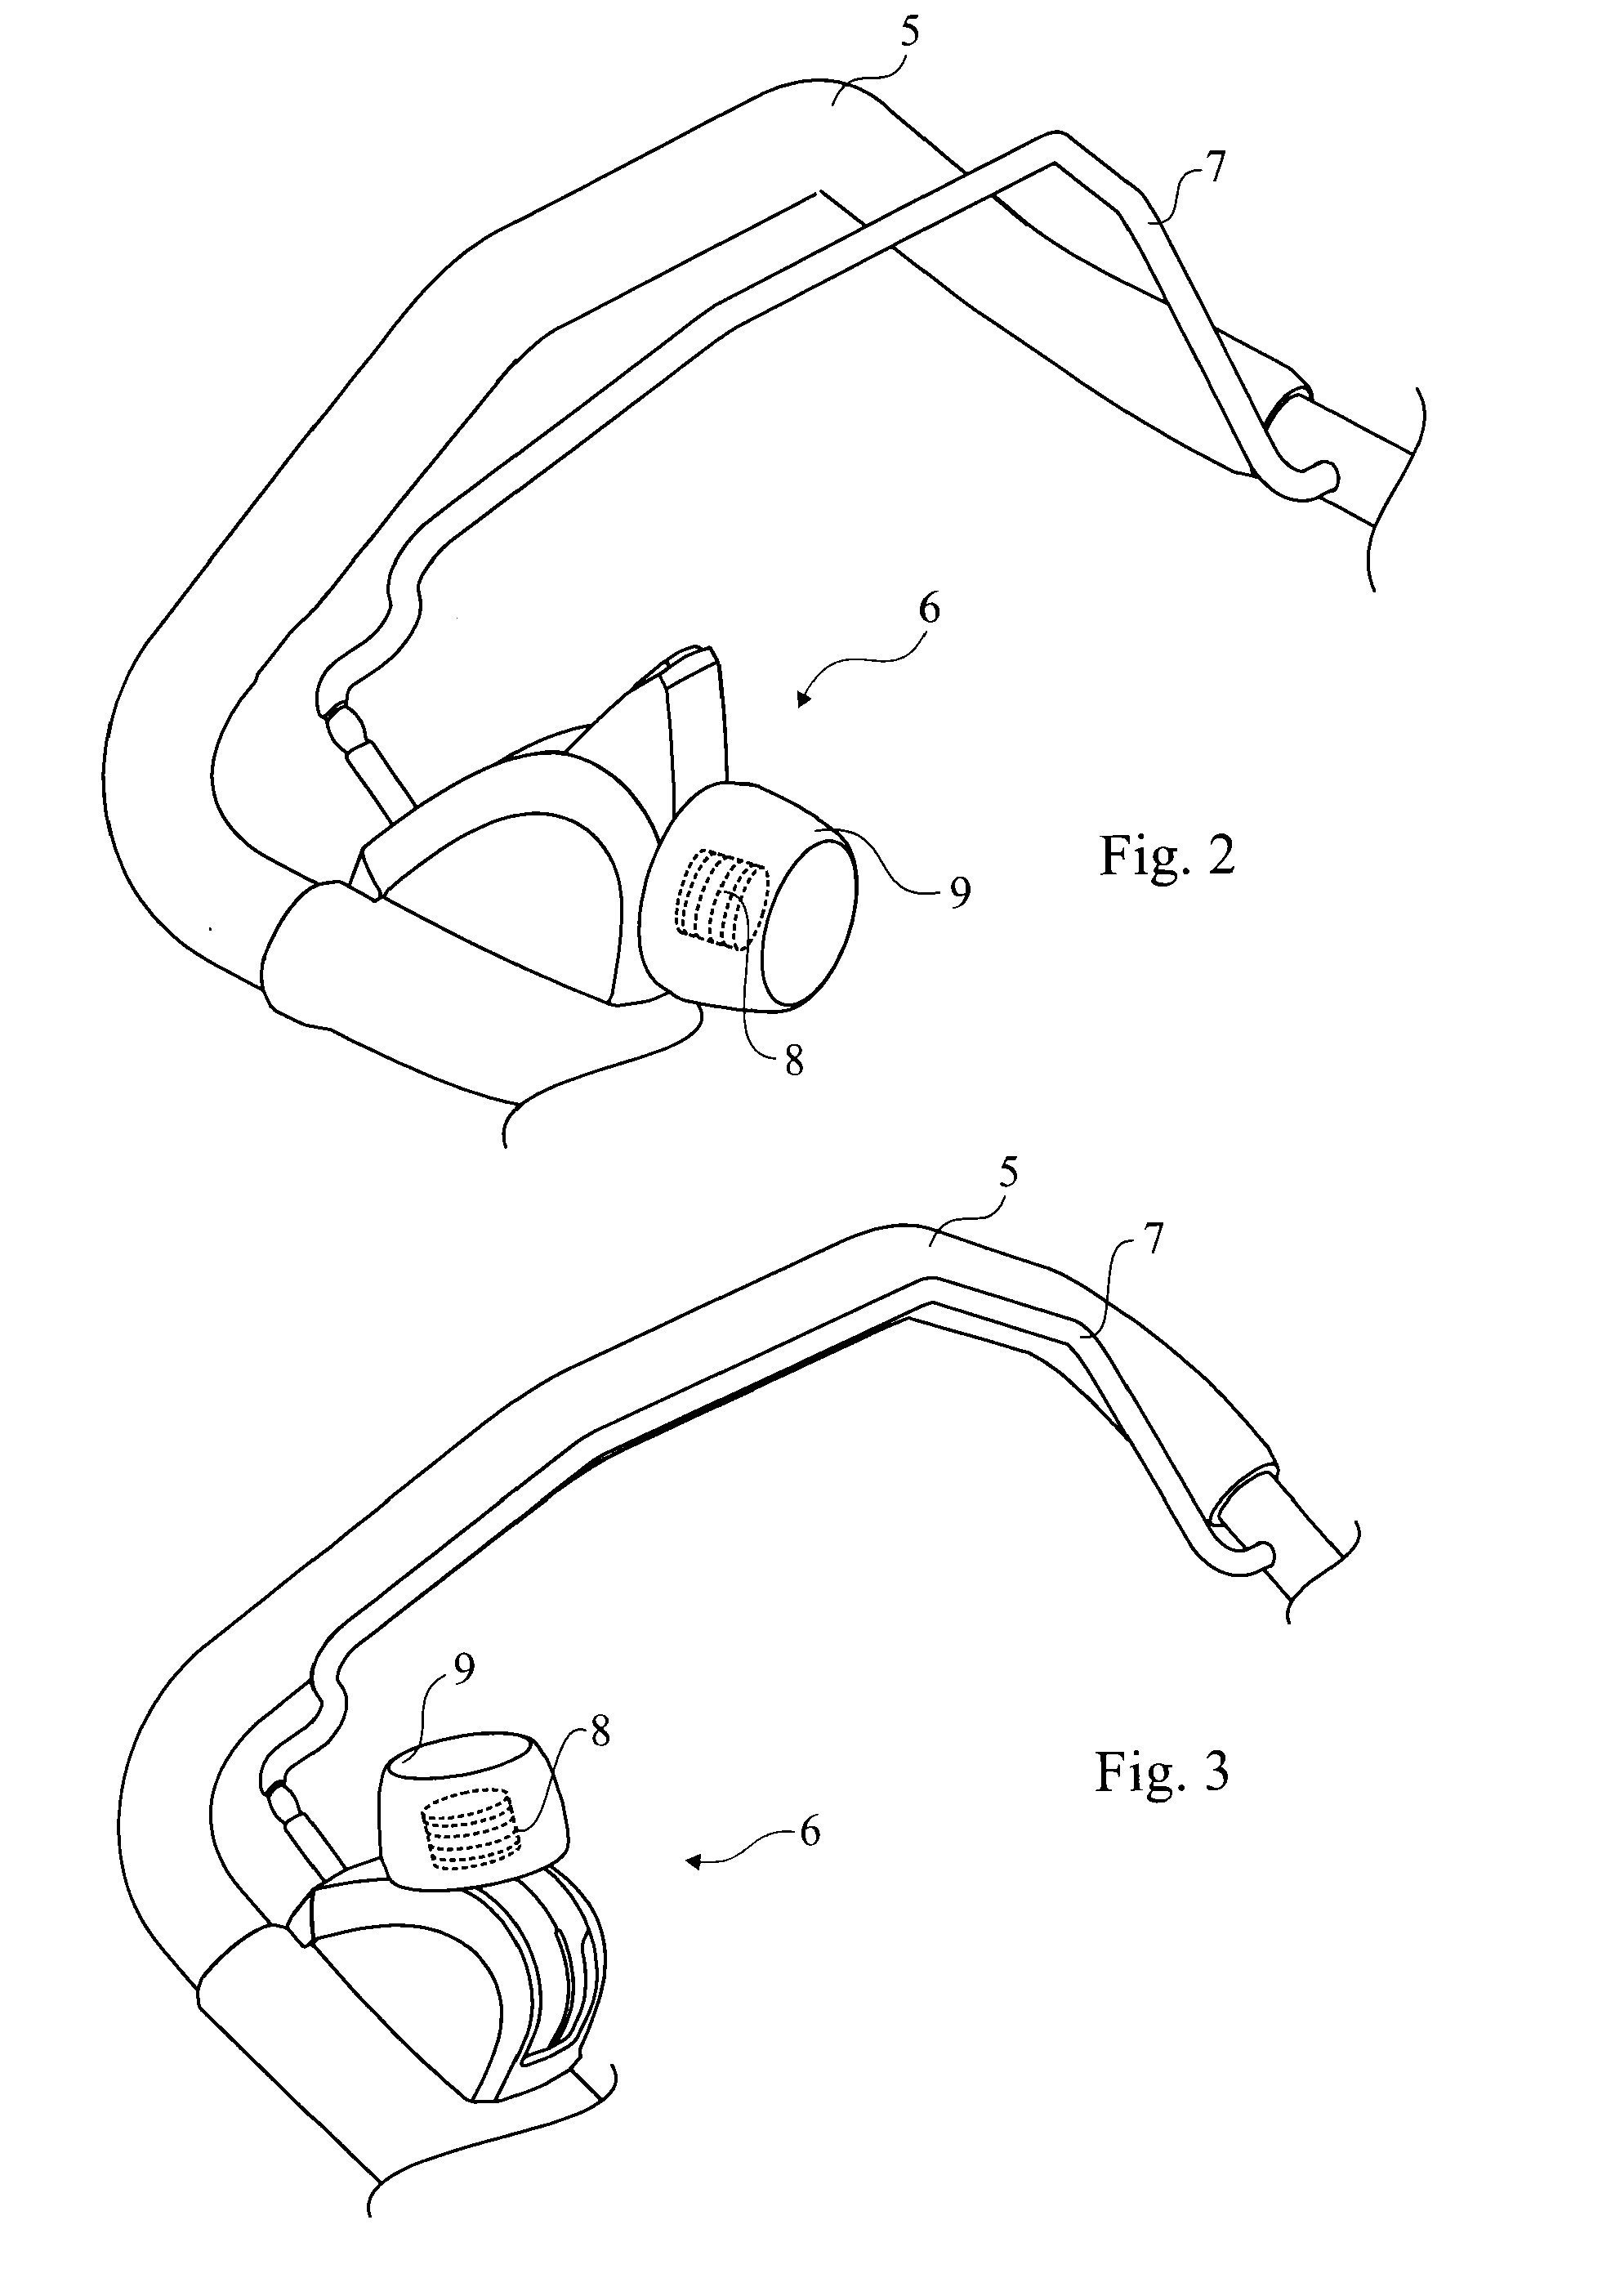 Drive hand-control system for a lawn mower